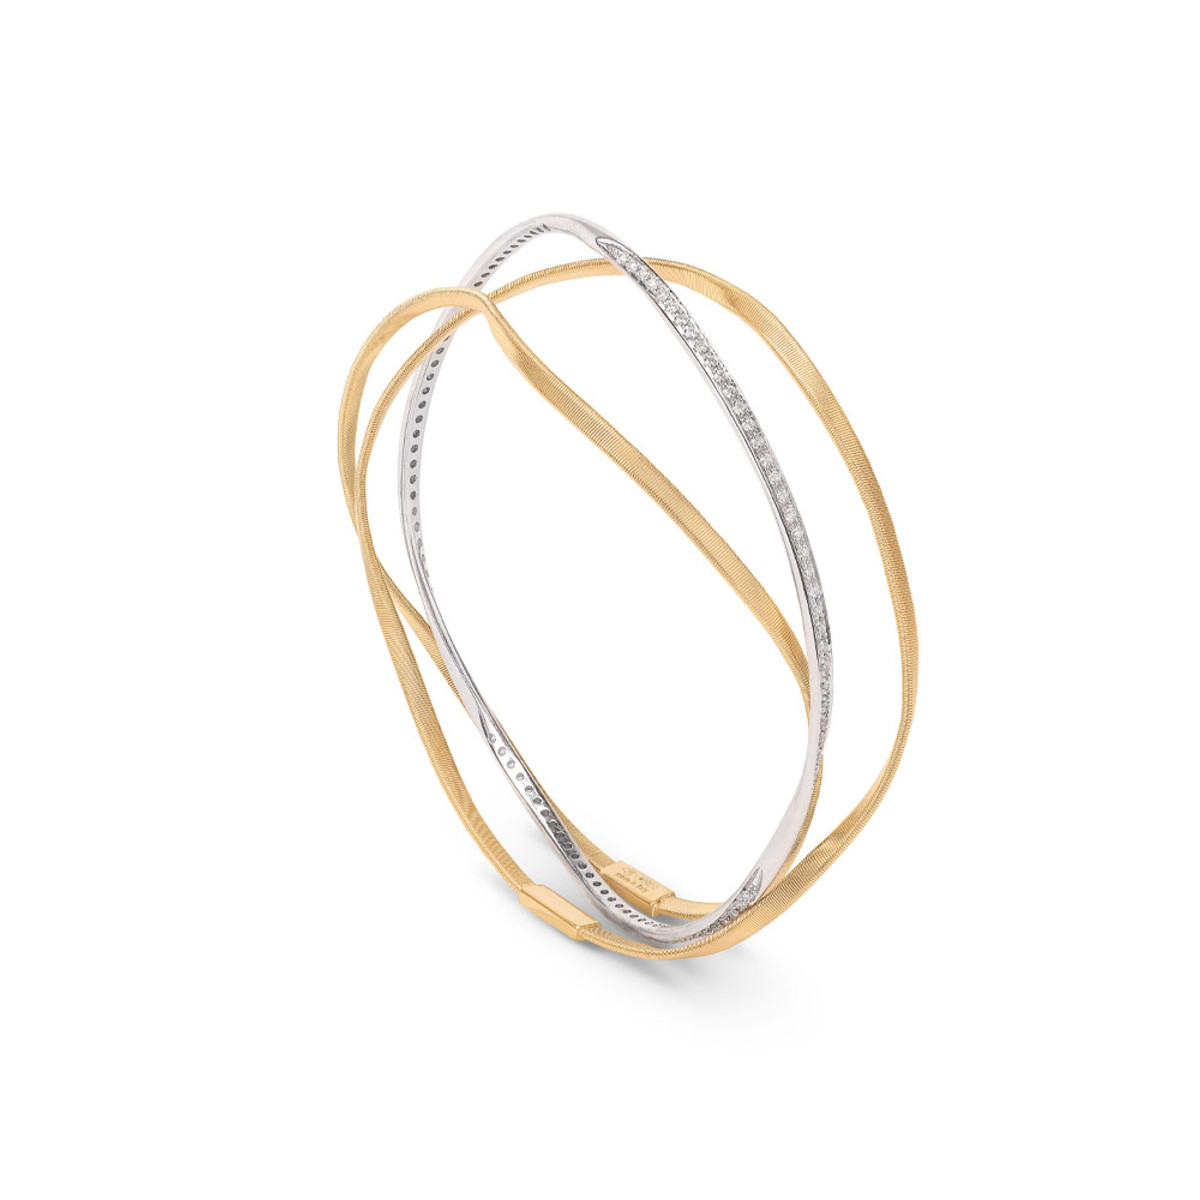 Marco Bicego Marrakech Collection 18K Yellow Gold 3 Row Diamond Hand Twisted Bangle-54253